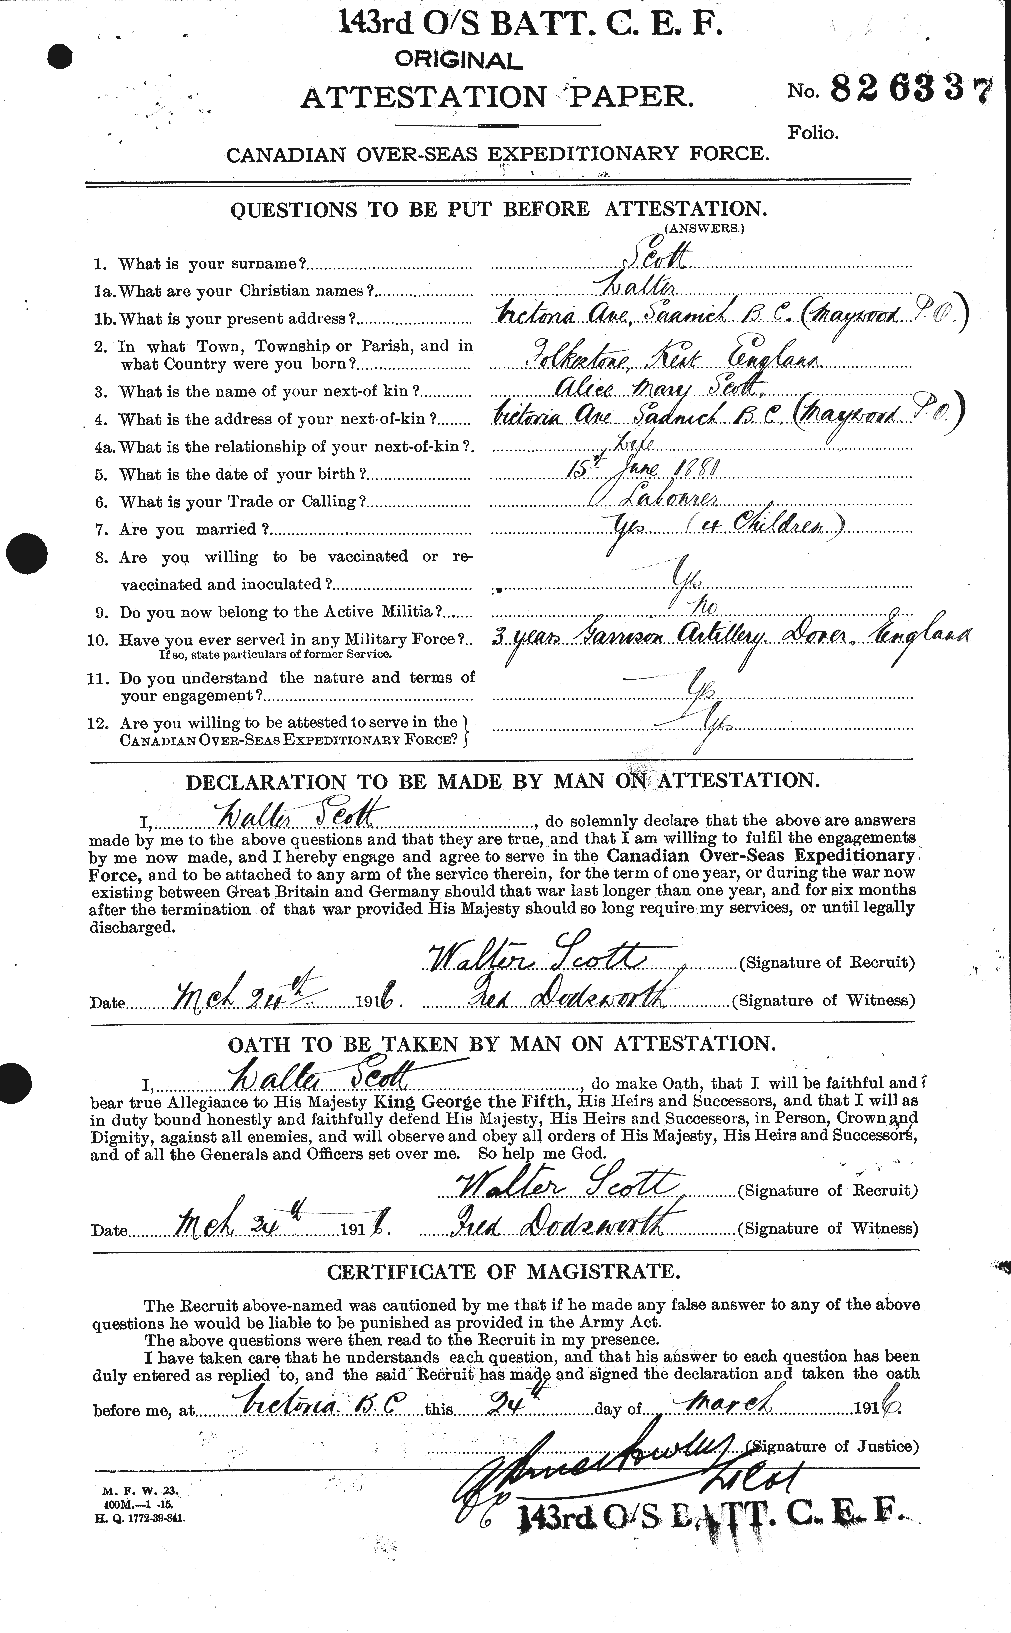 Personnel Records of the First World War - CEF 088019a